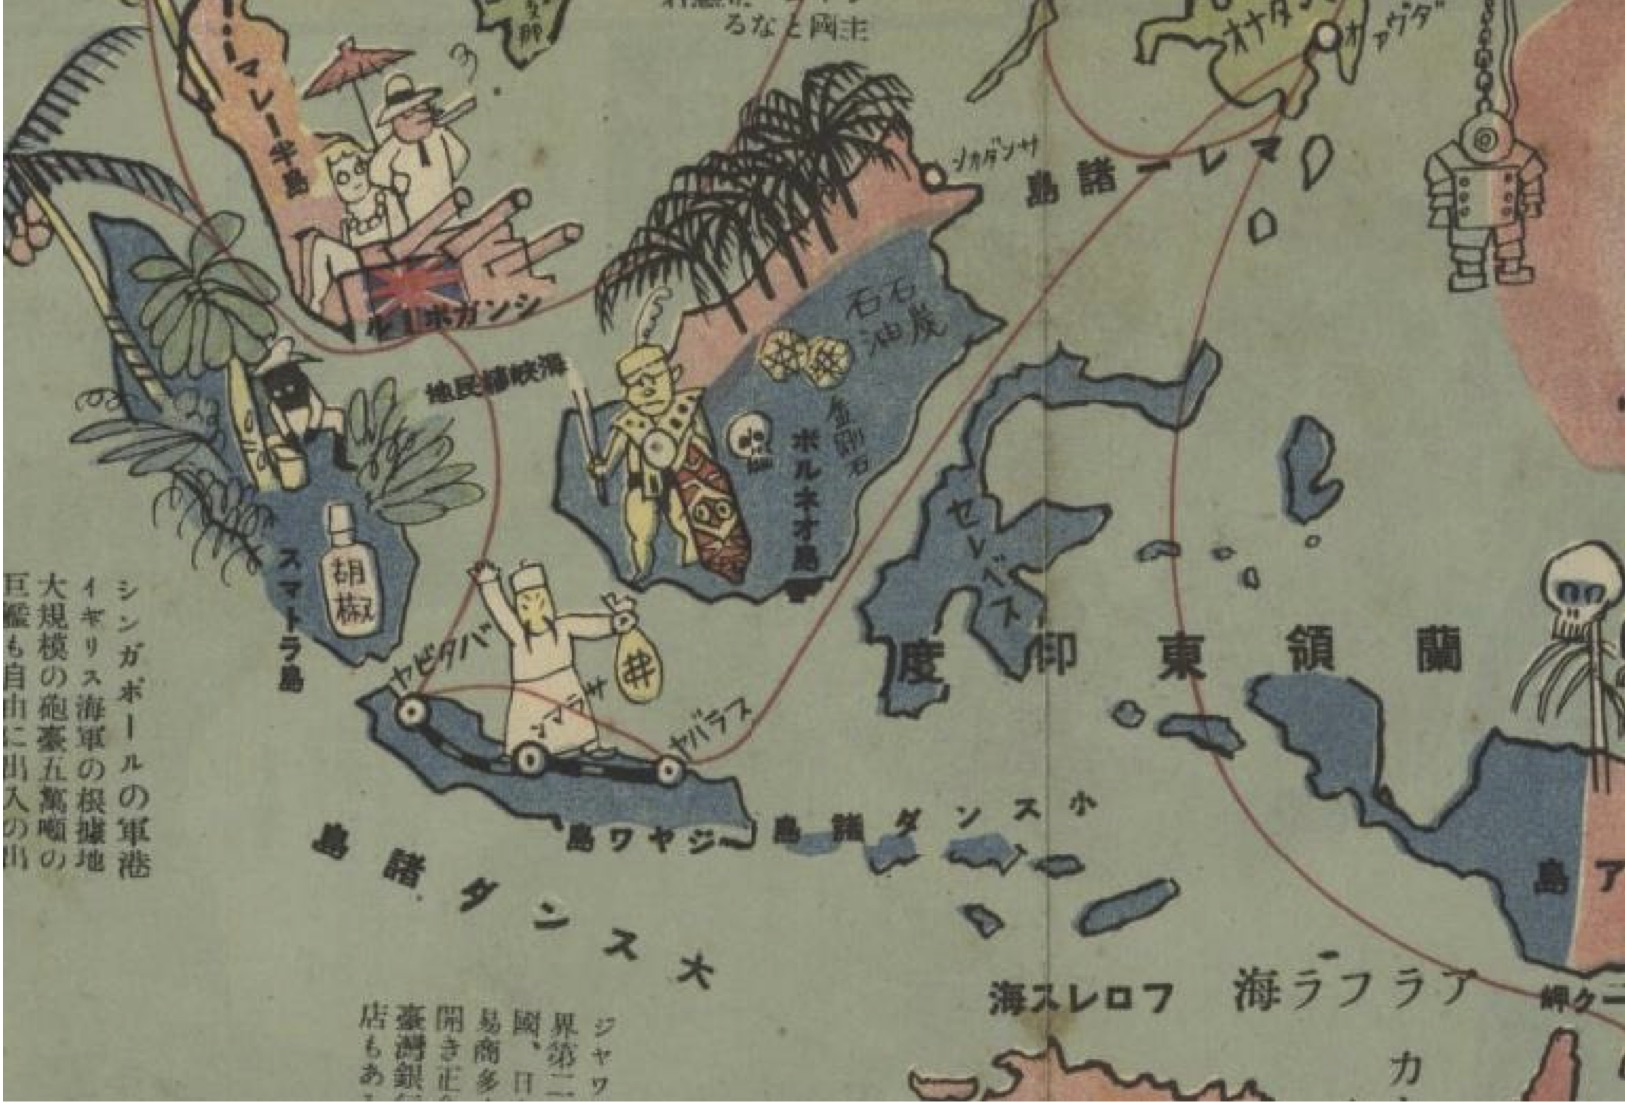 A 1932 Japanese map of the Dutch East Indies